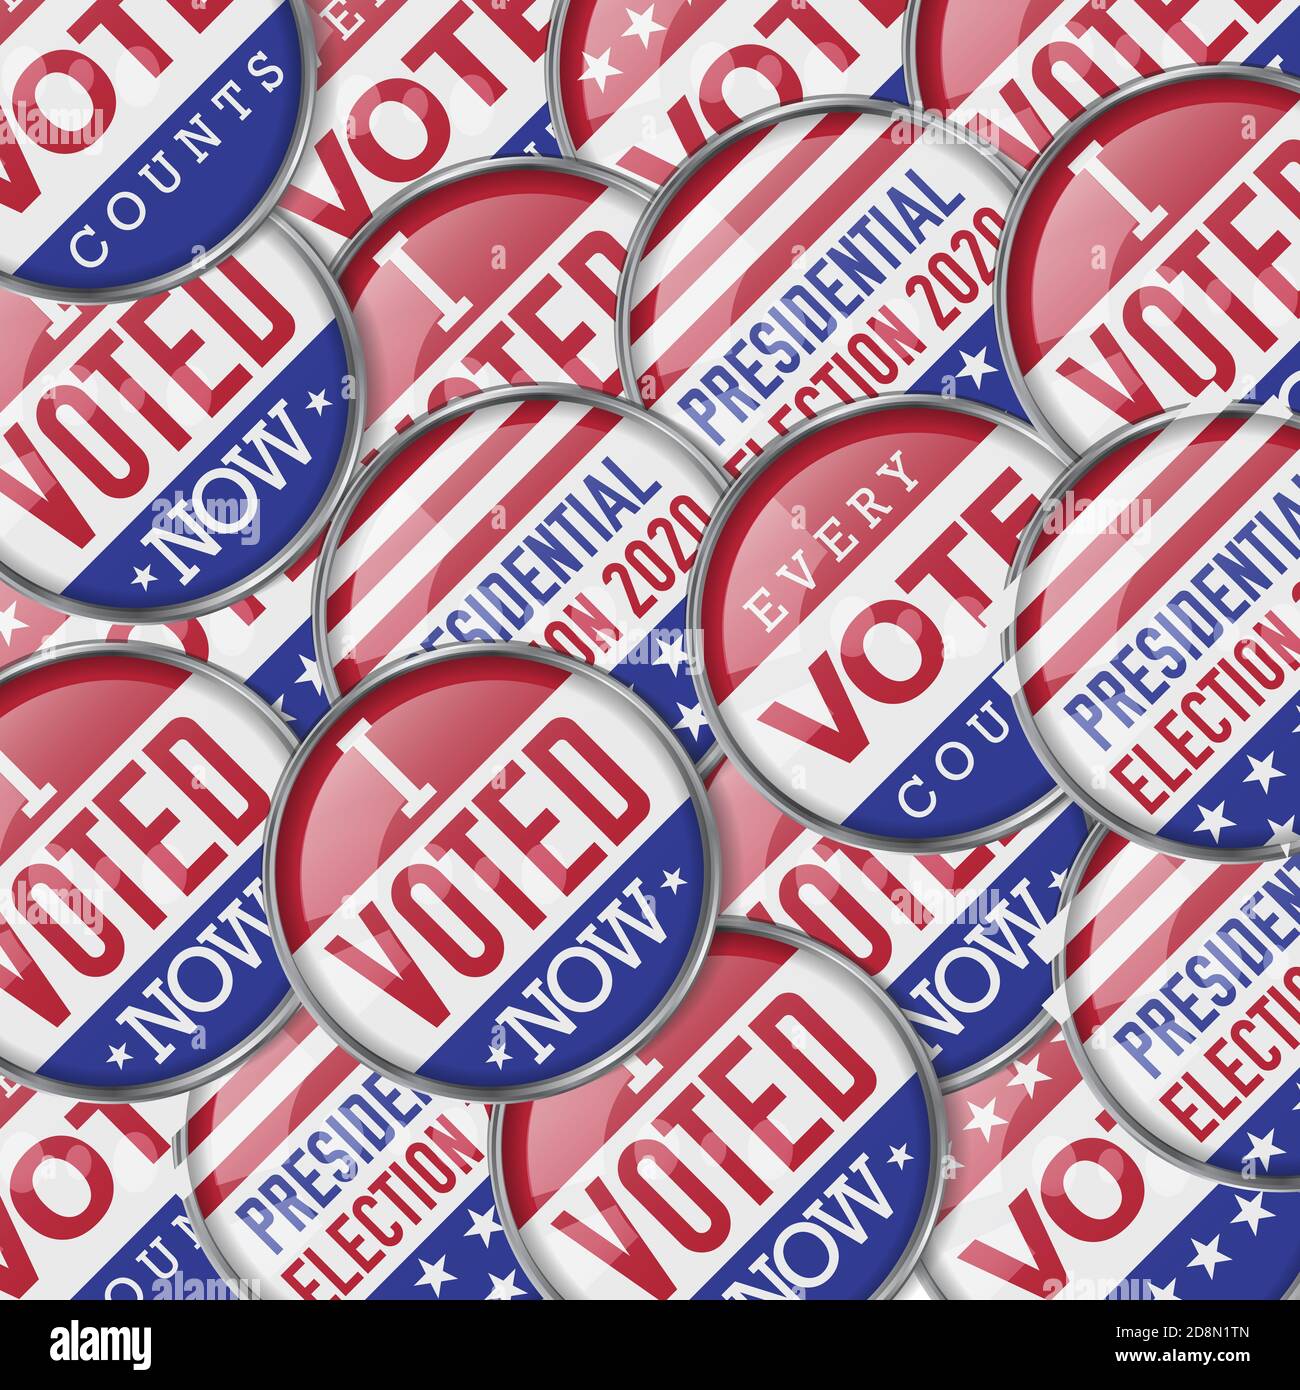 Voting badges realistic background. 2020 United States presidential election. illustration. Stock Photo